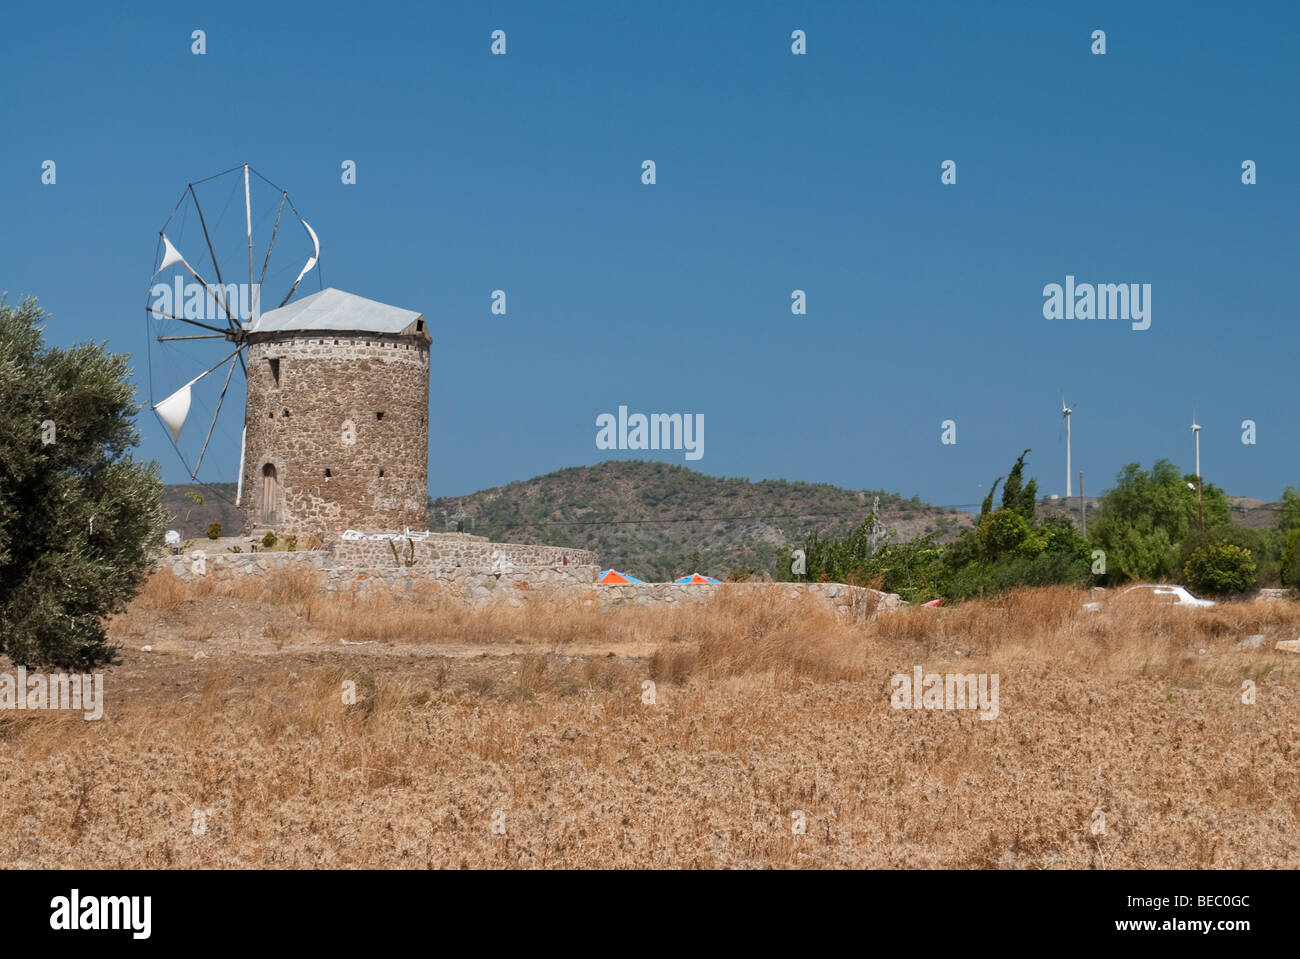 Old windmill with new wind turbines in the background on the Datca peninsula, near Marmaris, Turkey Stock Photo